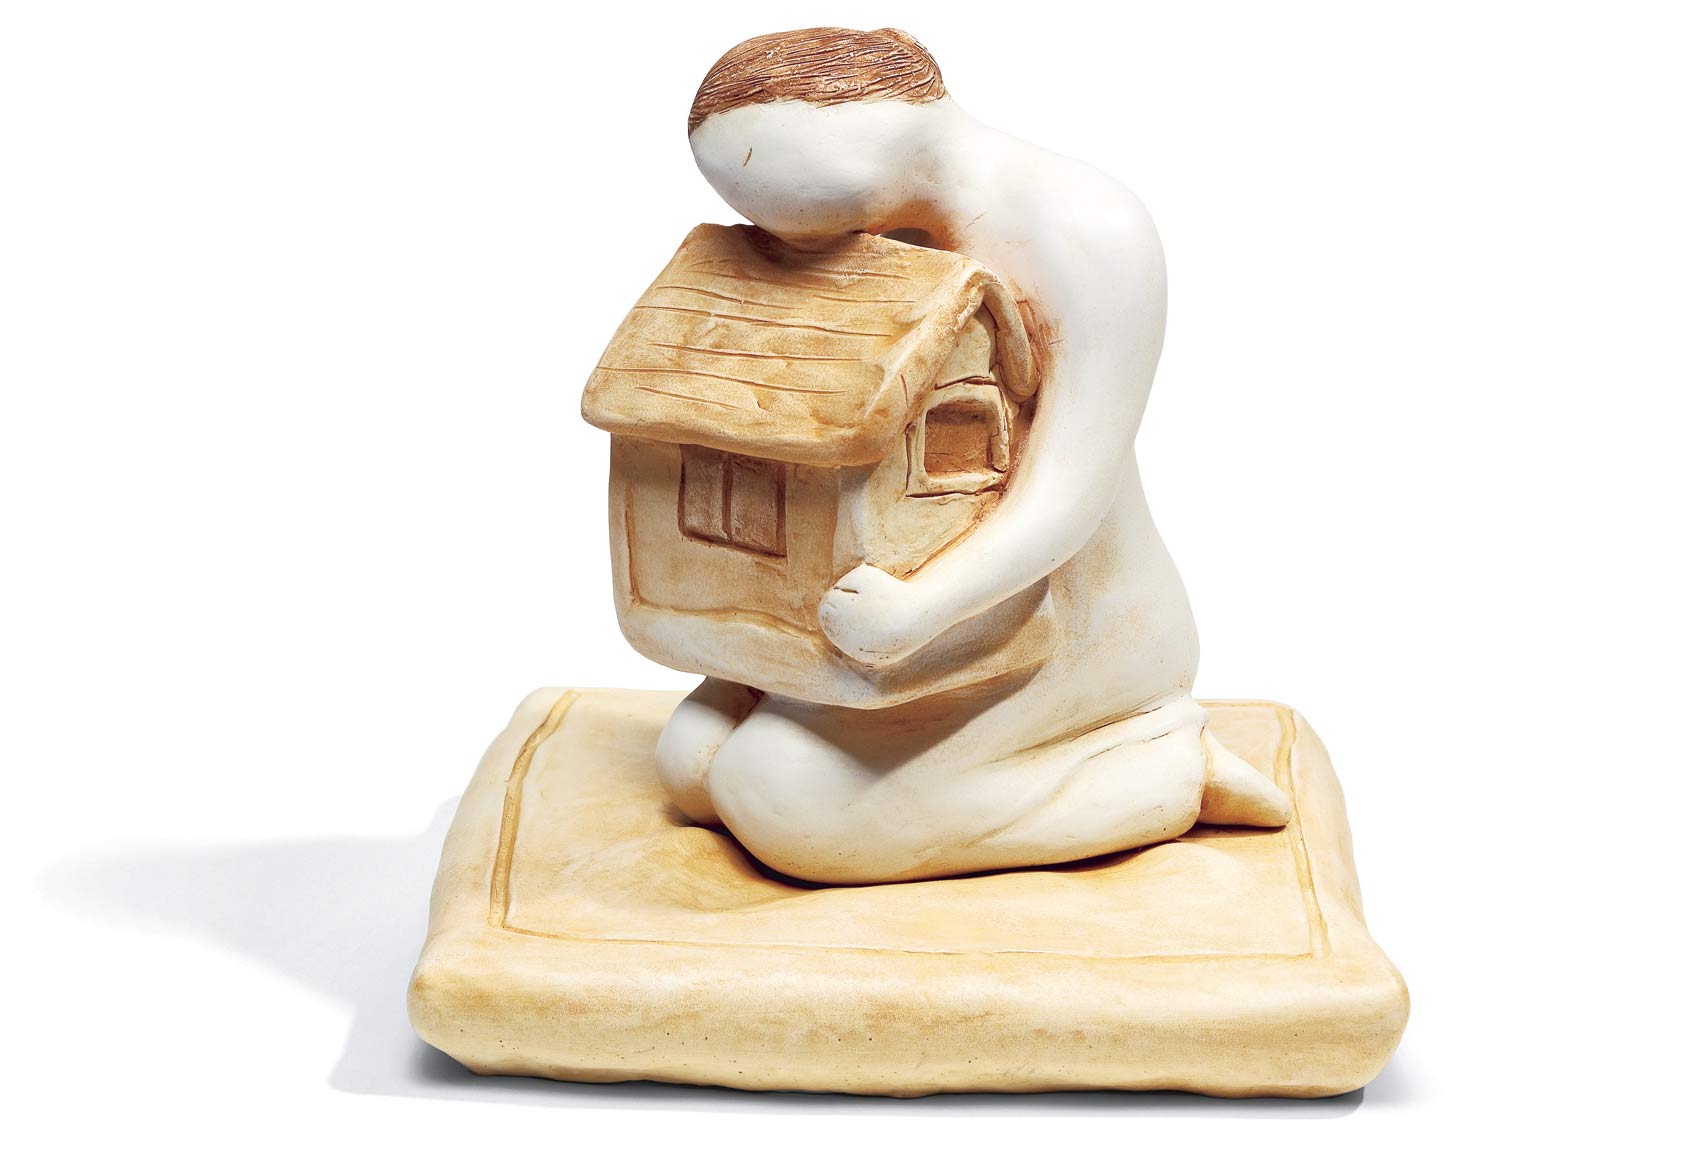 <em>House Within</em>, 2005. Hydro stone casting, Hand painted, 8 x 8 x 9 in. (21 x 21 x 23 cm)